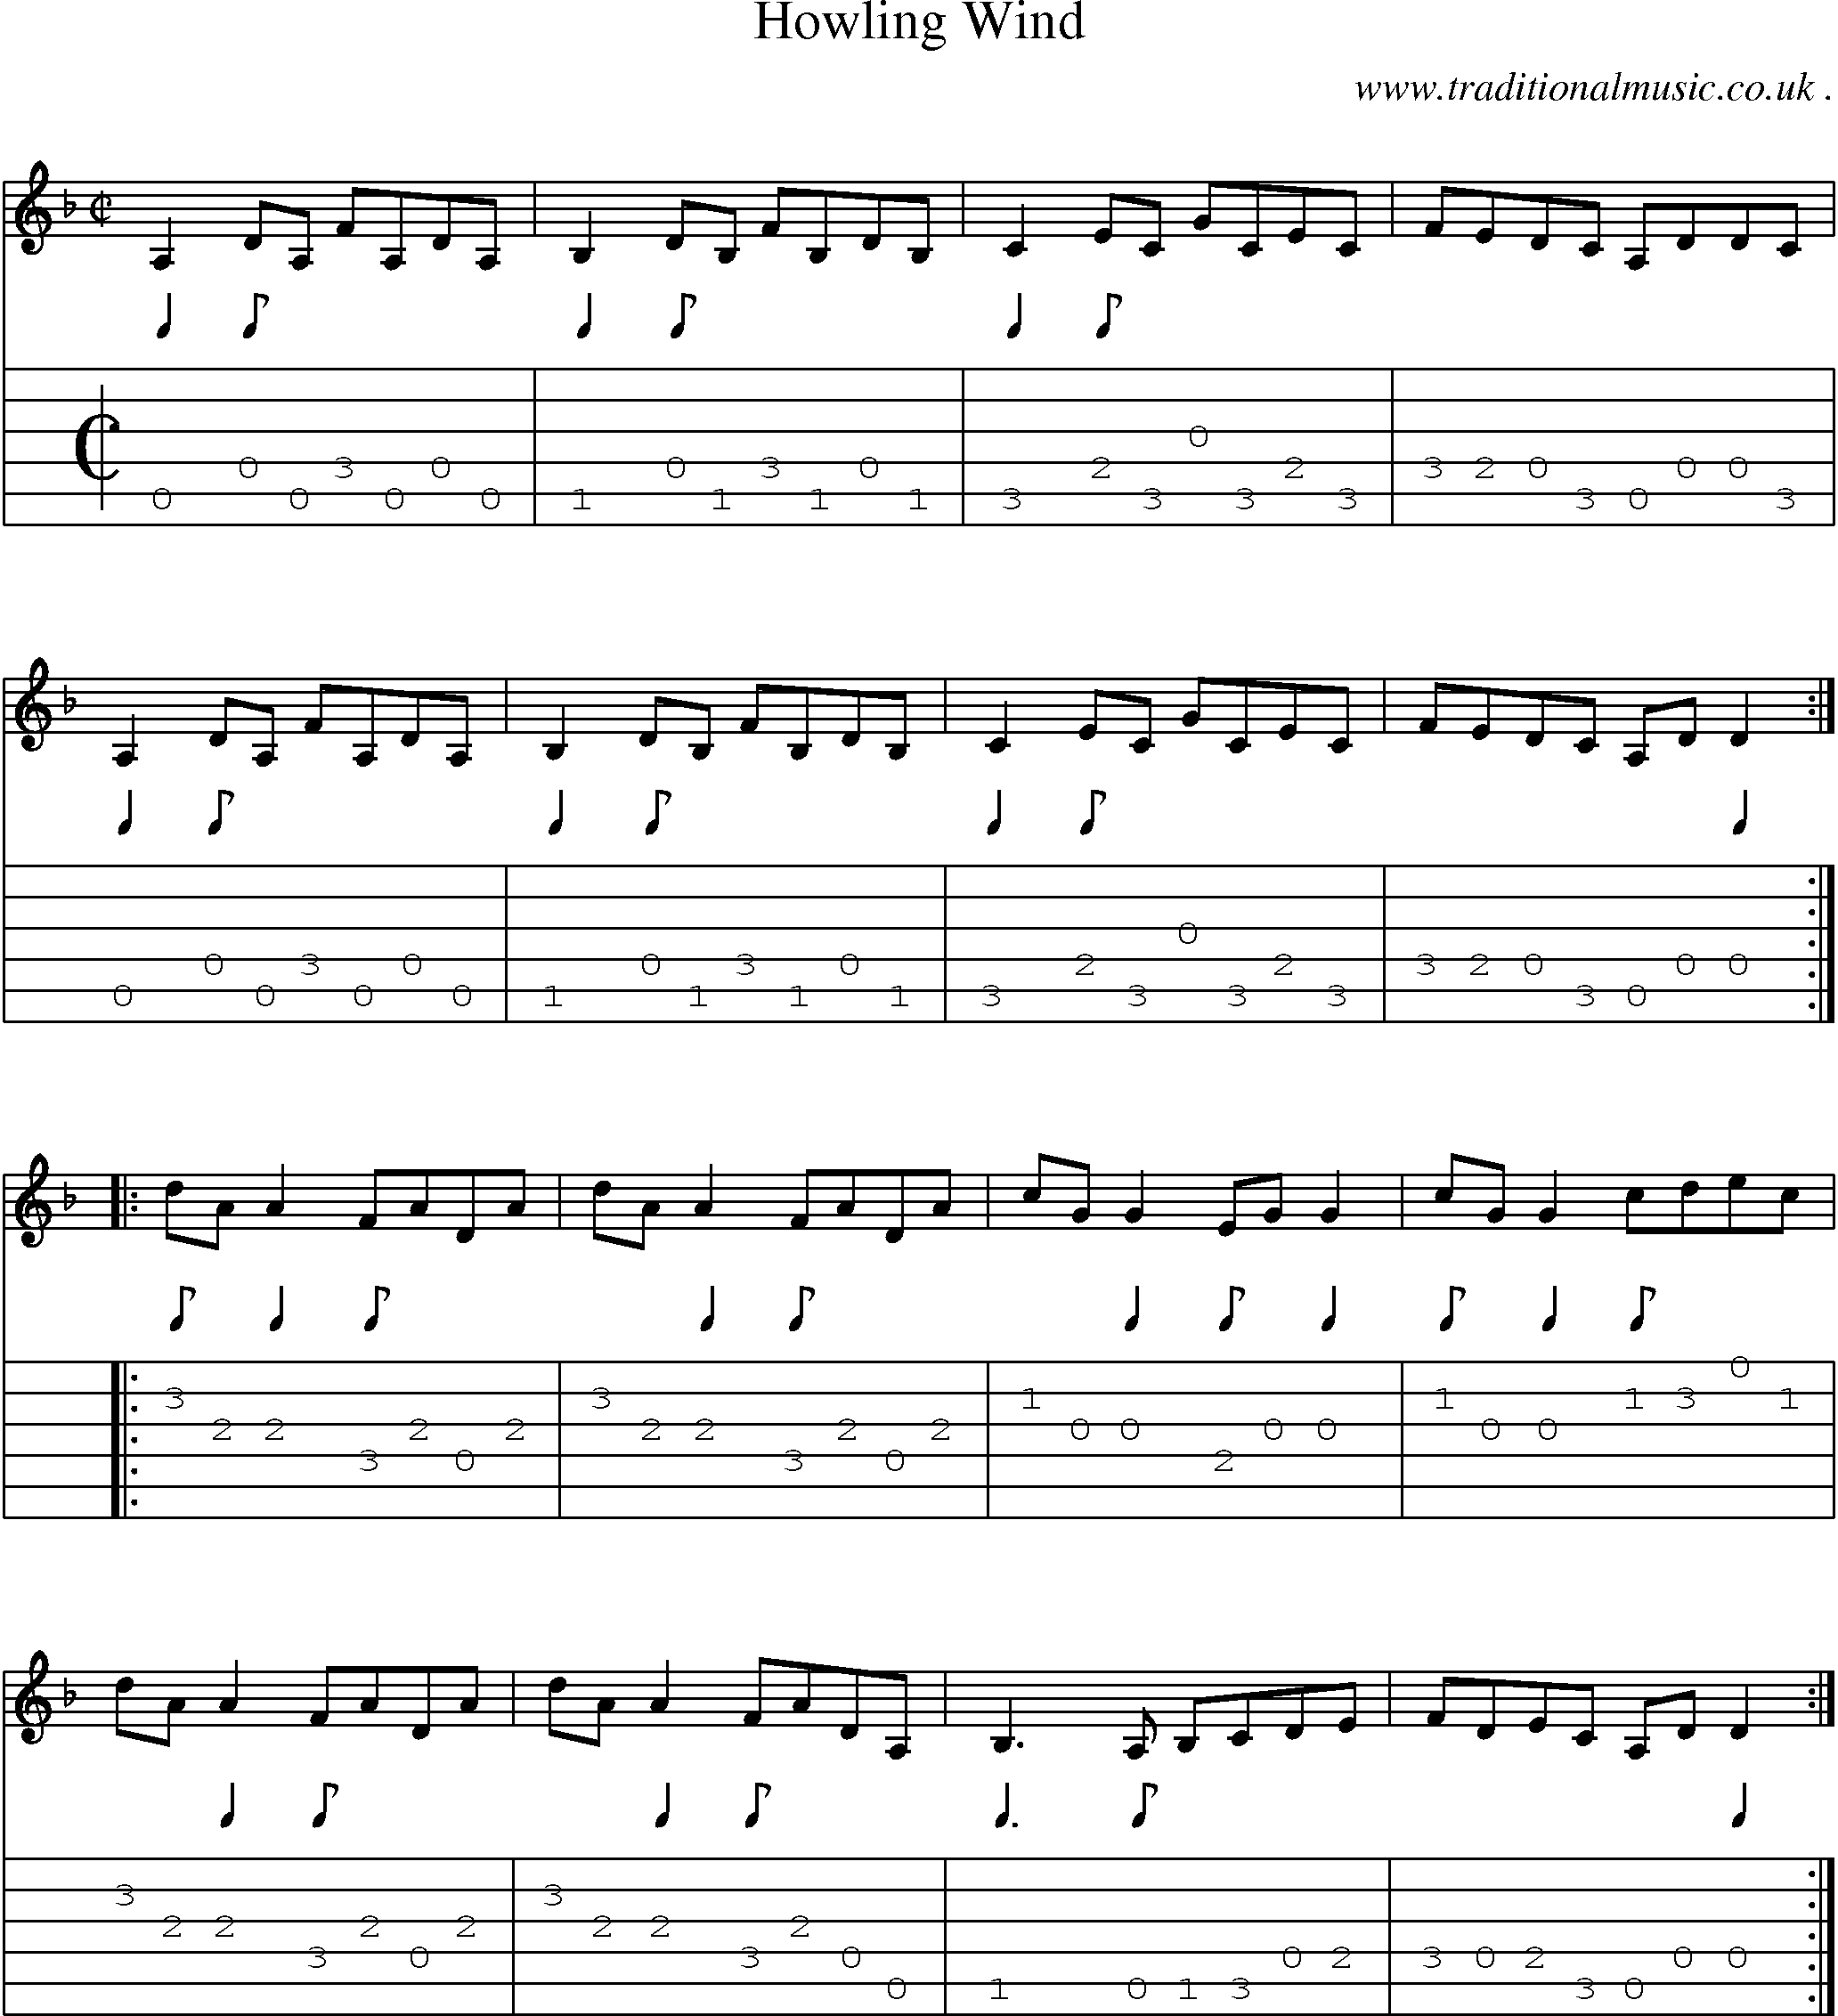 Sheet-Music and Guitar Tabs for Howling Wind